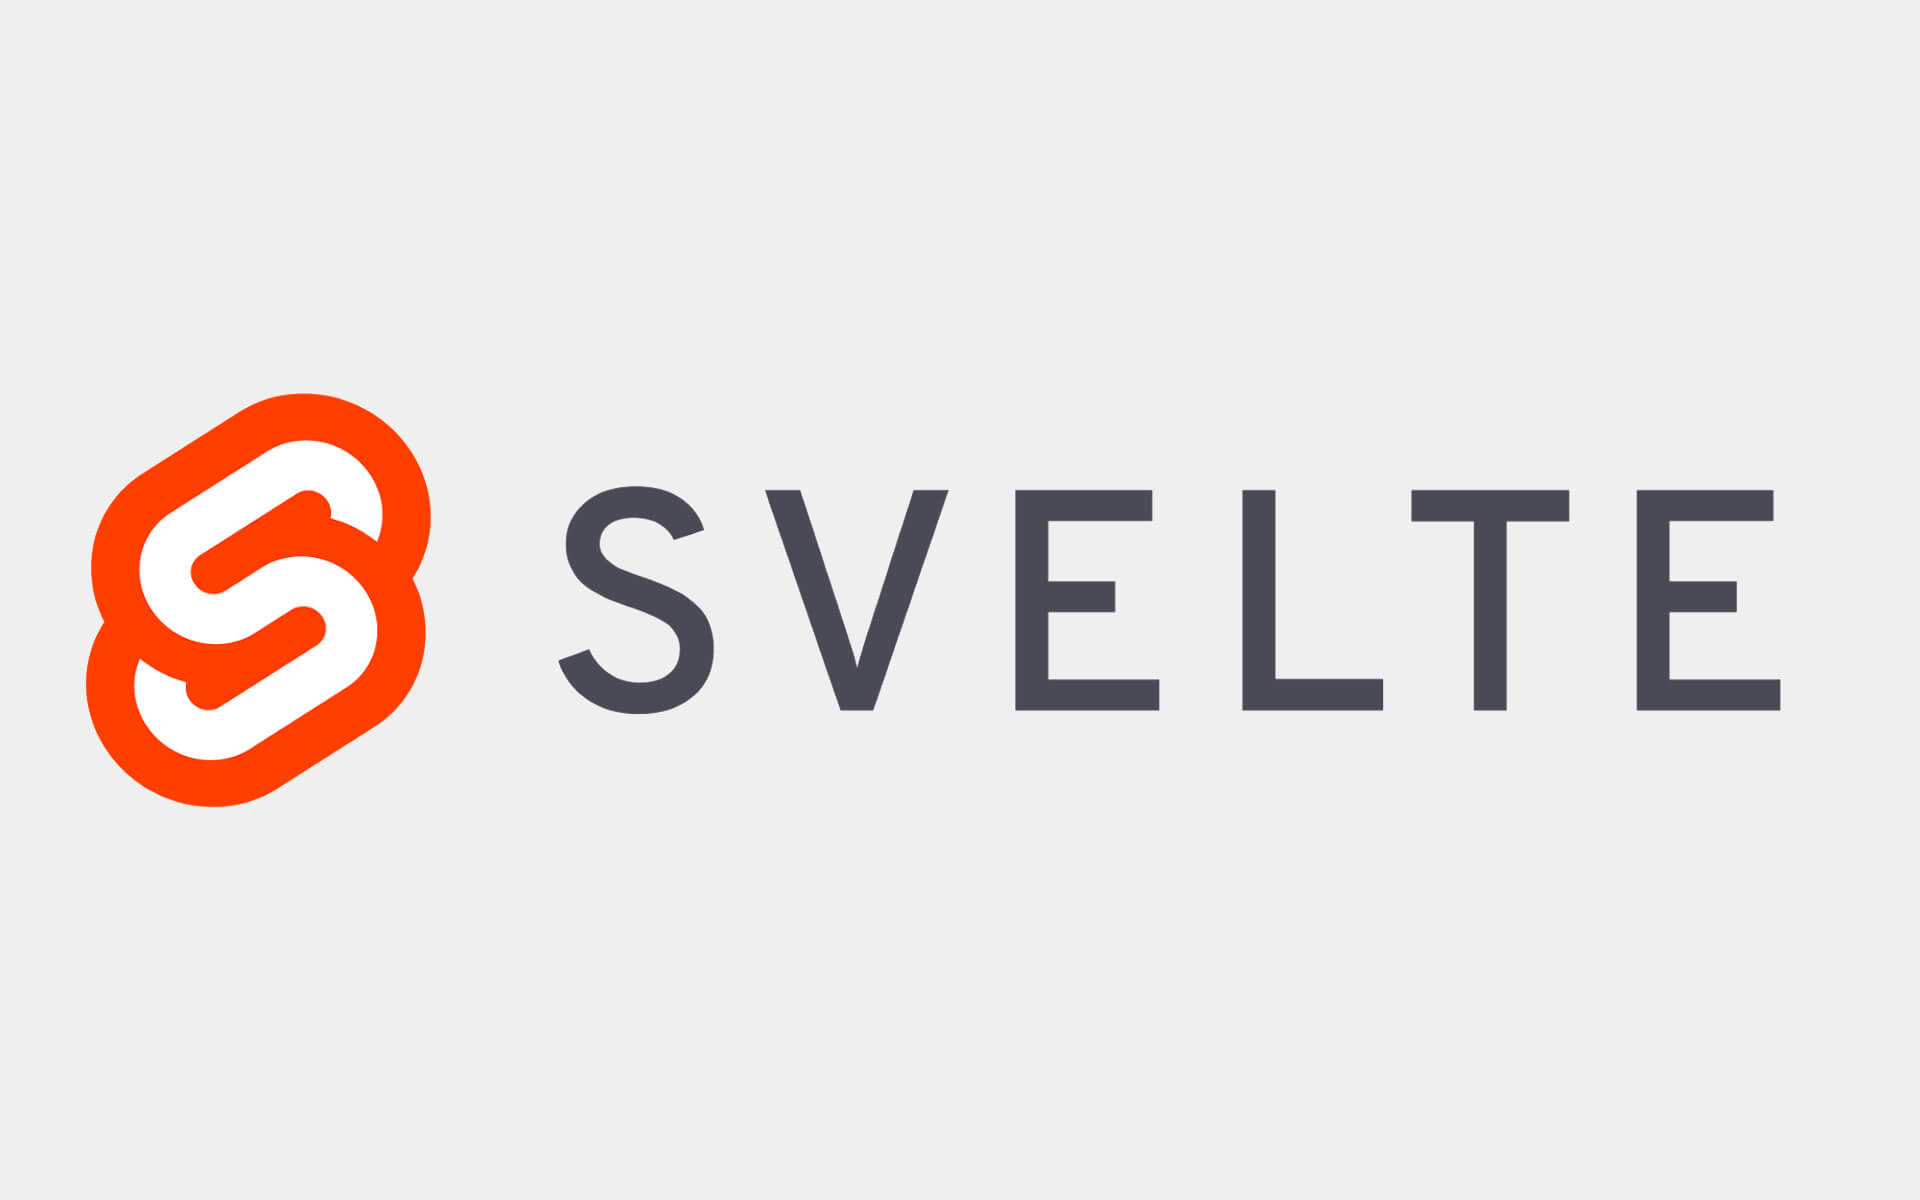 develop incredibly lightweight and blazingly fast static websites with svelte